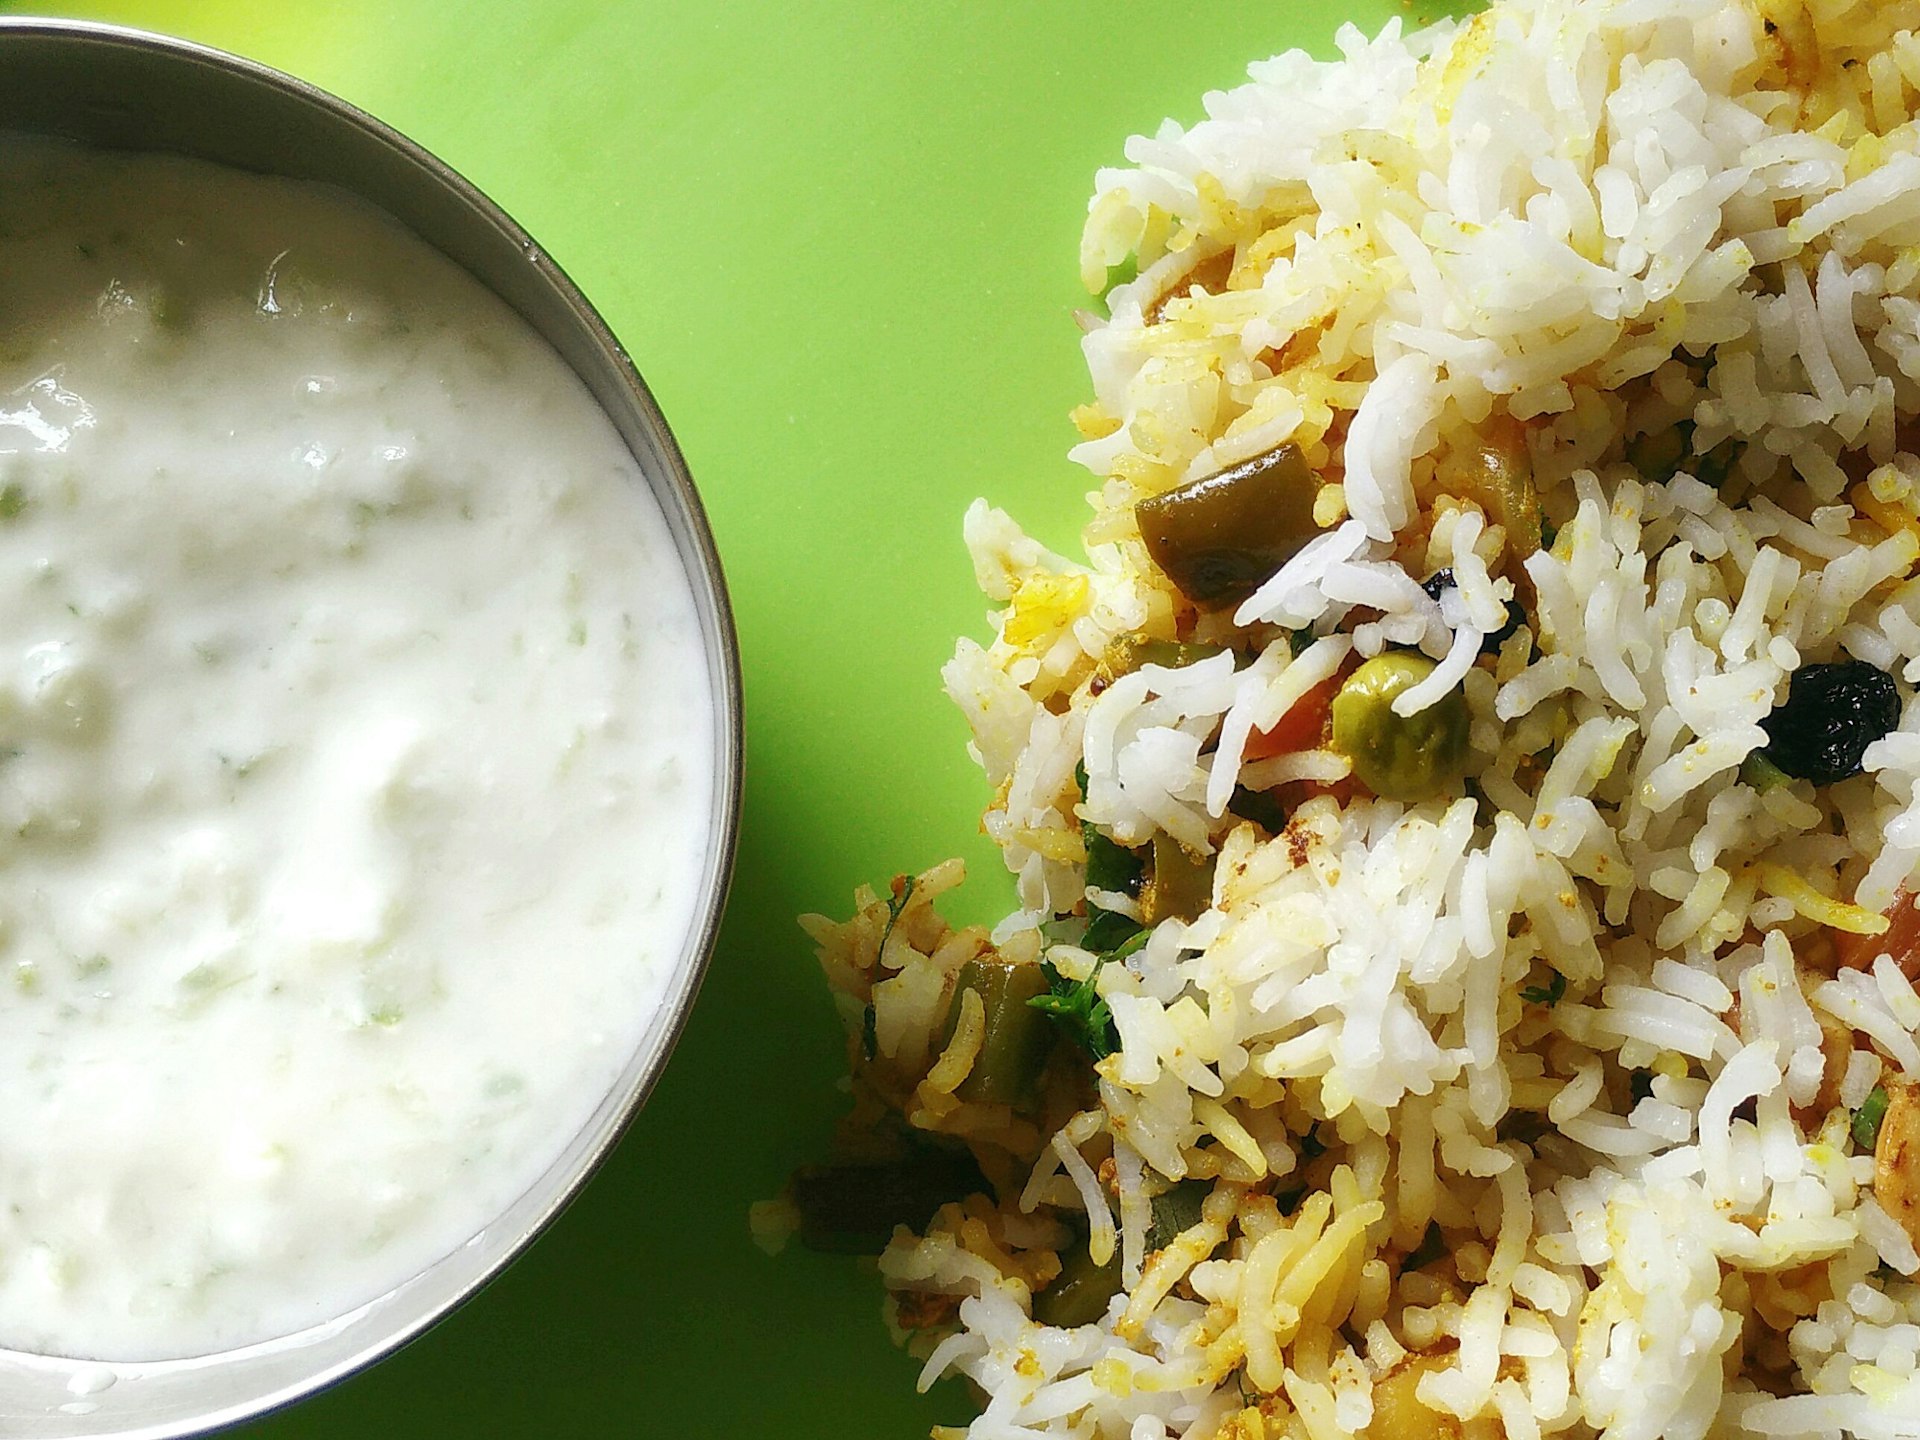 Simple, healthy meals are all the rage in Mumbai. Image by Mathew P George / EyeEm / Getty Images